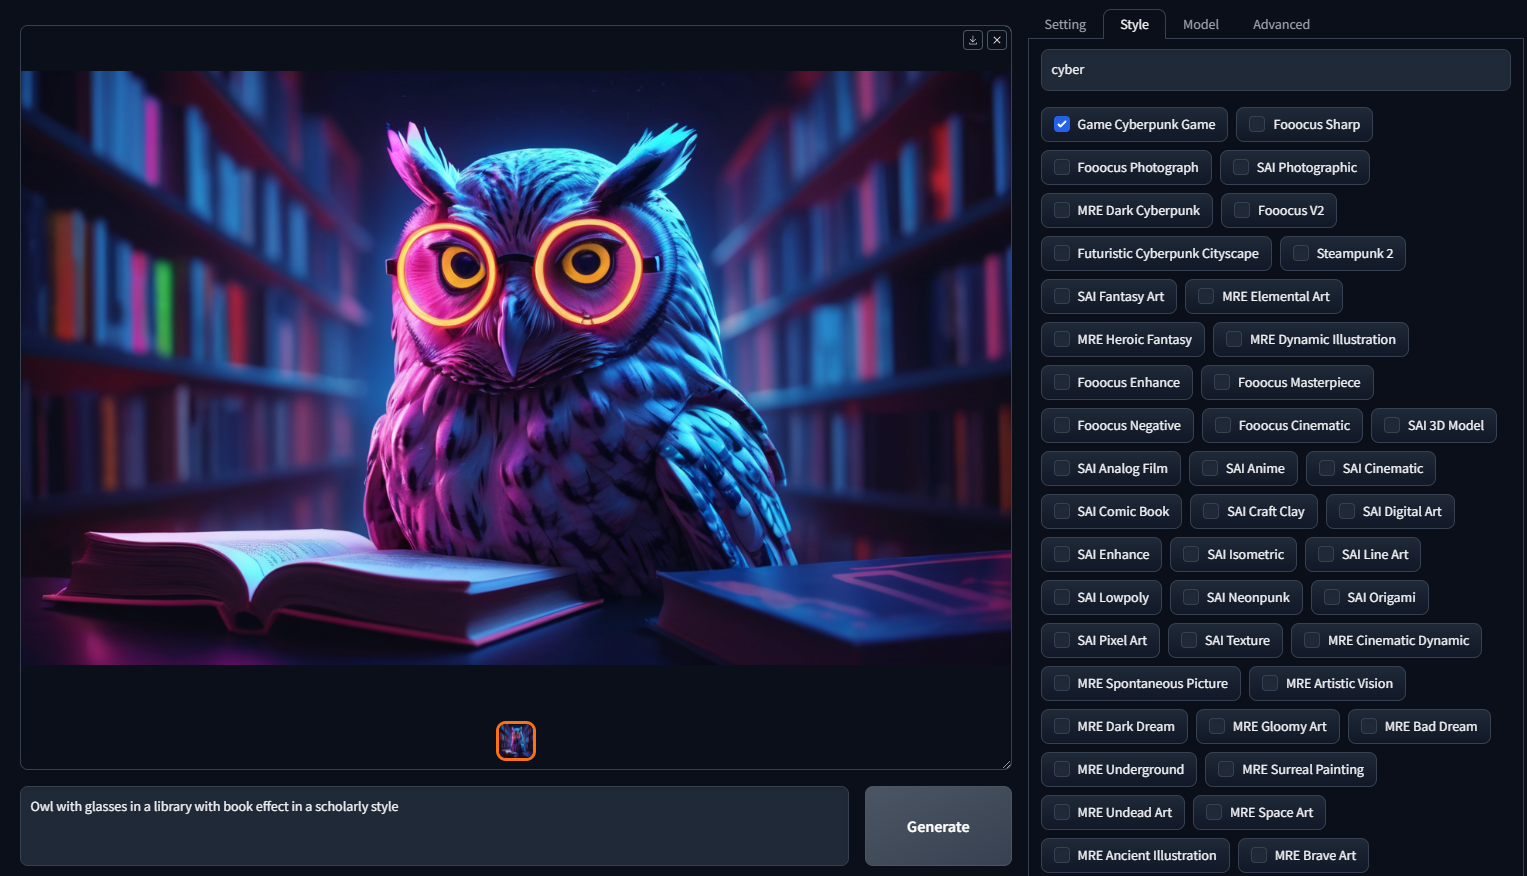 Owl with glasses in a library with book effect in a scholarly style